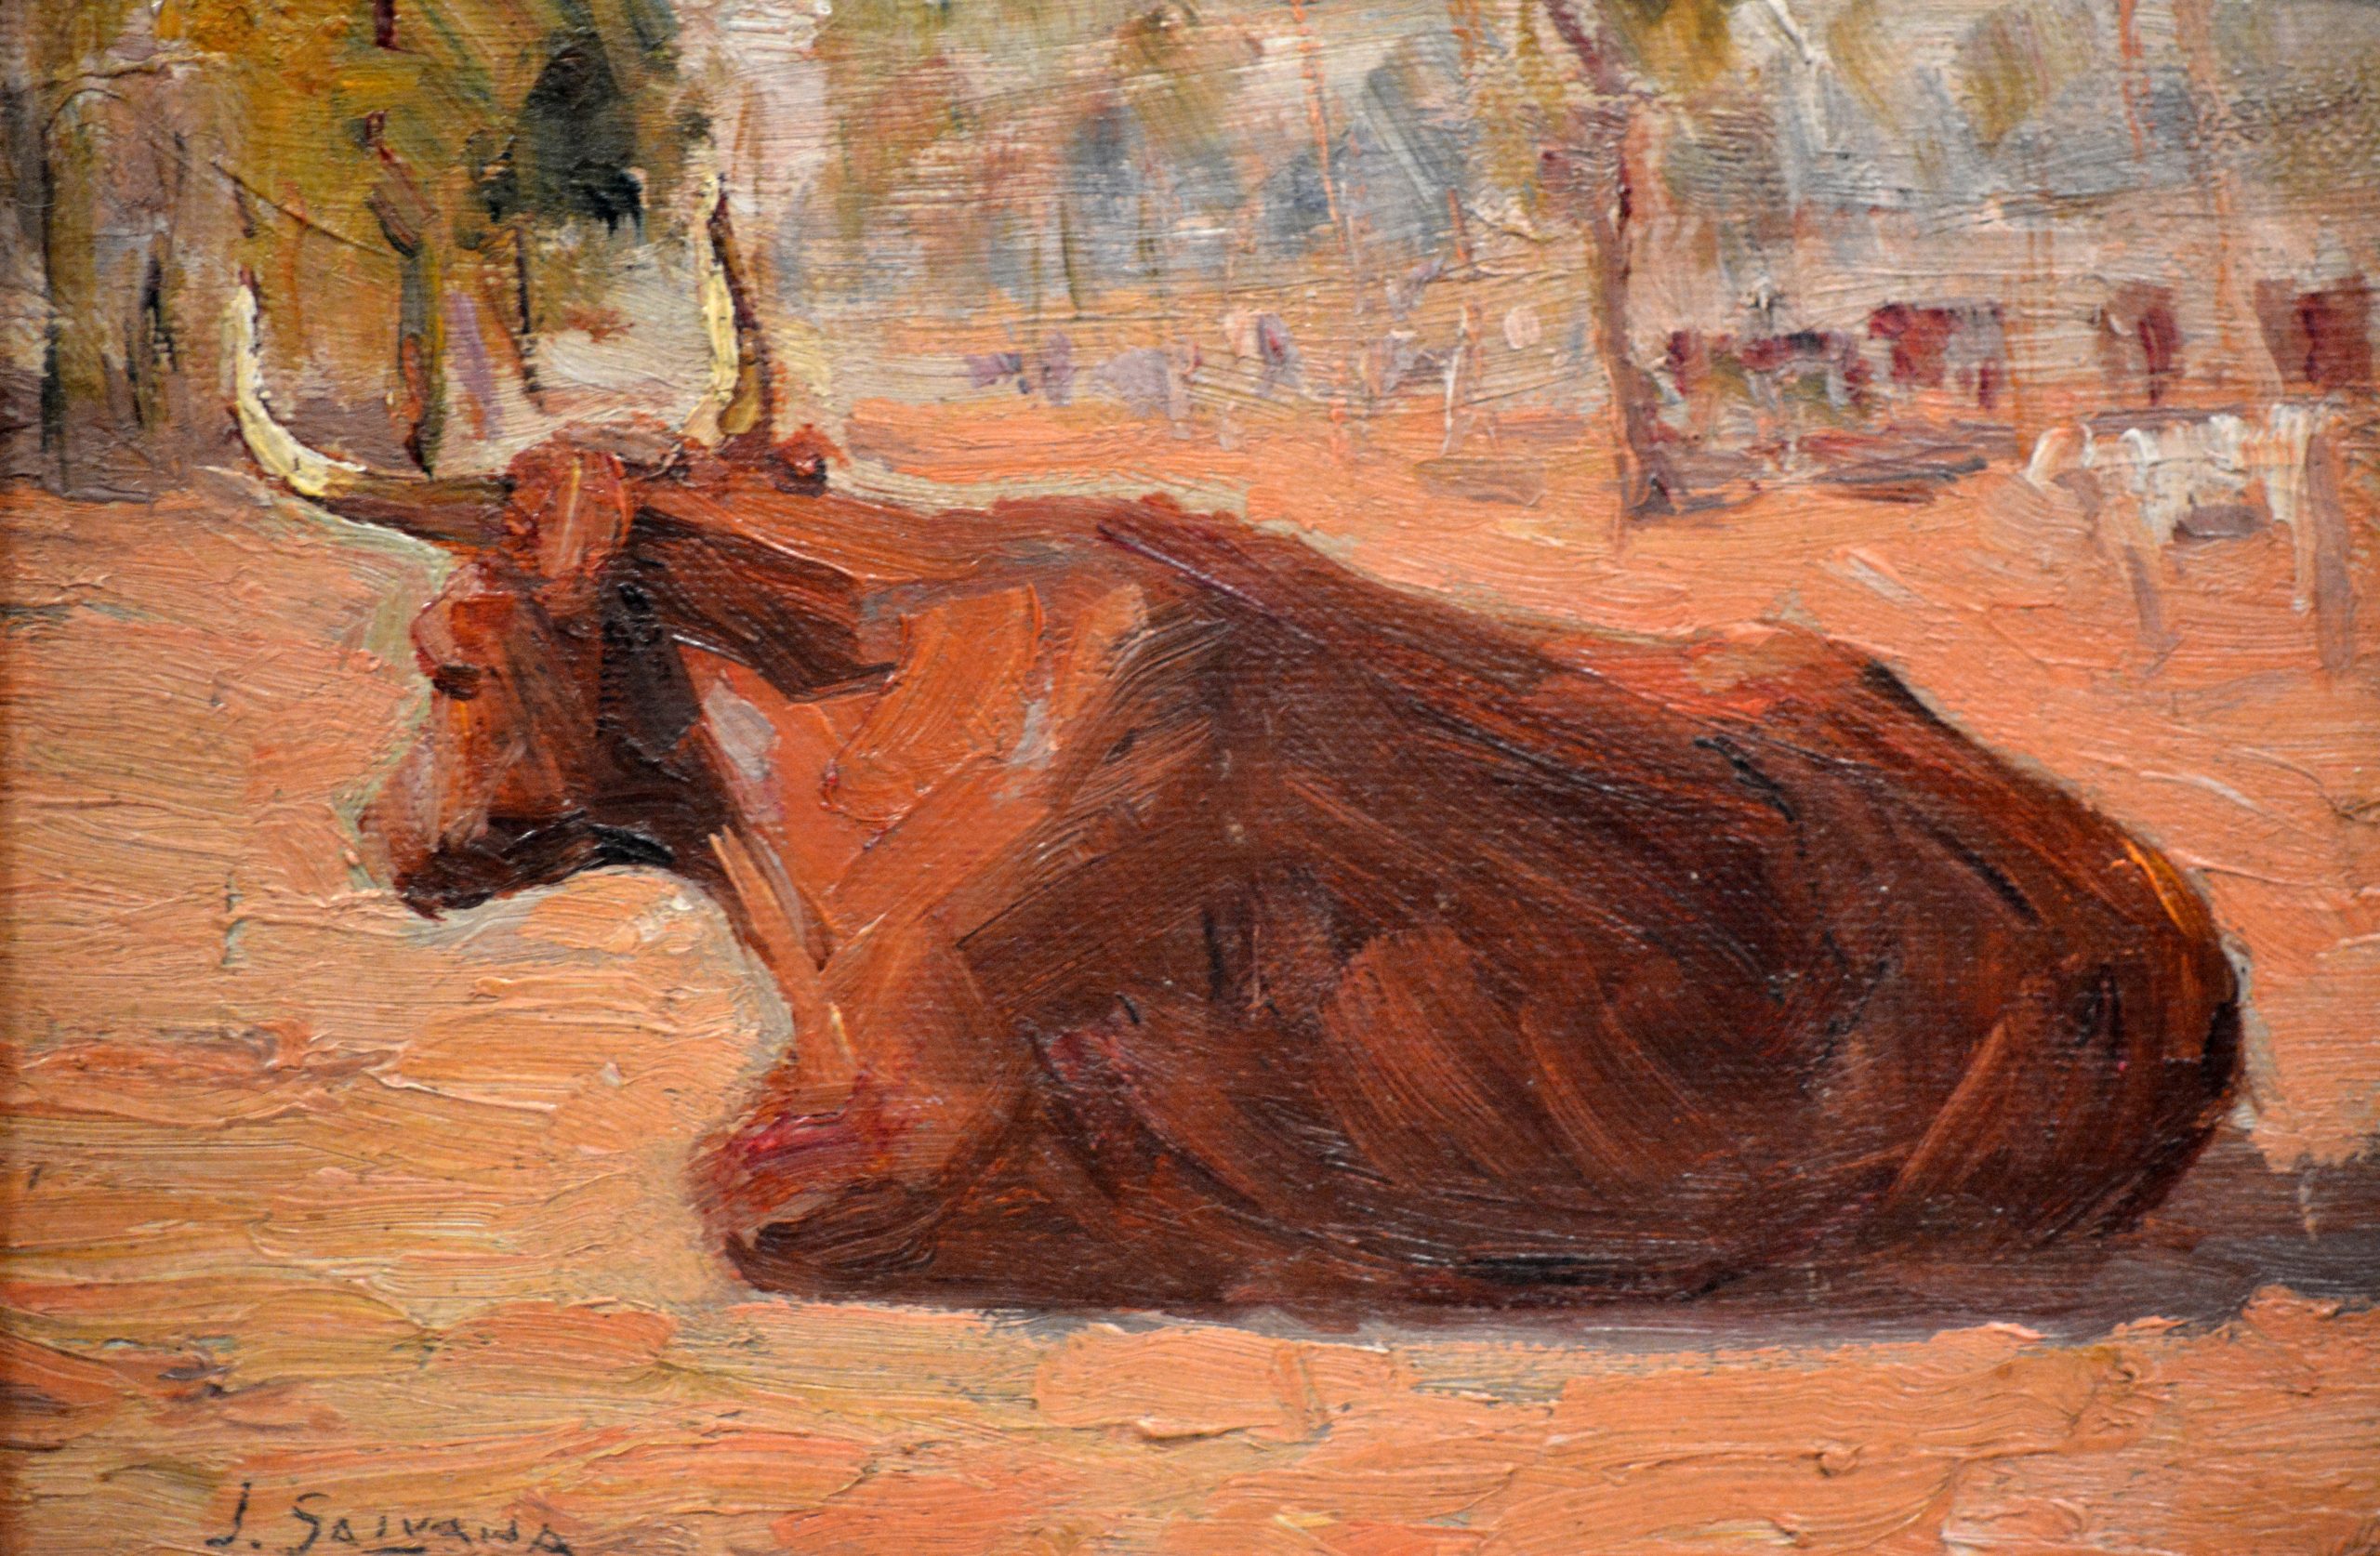 Painting of a bull sitting on the dusty red earth while other cows stand in a shaded area of the background; strokes of paint are applied liberally, rich in dark reds and browns